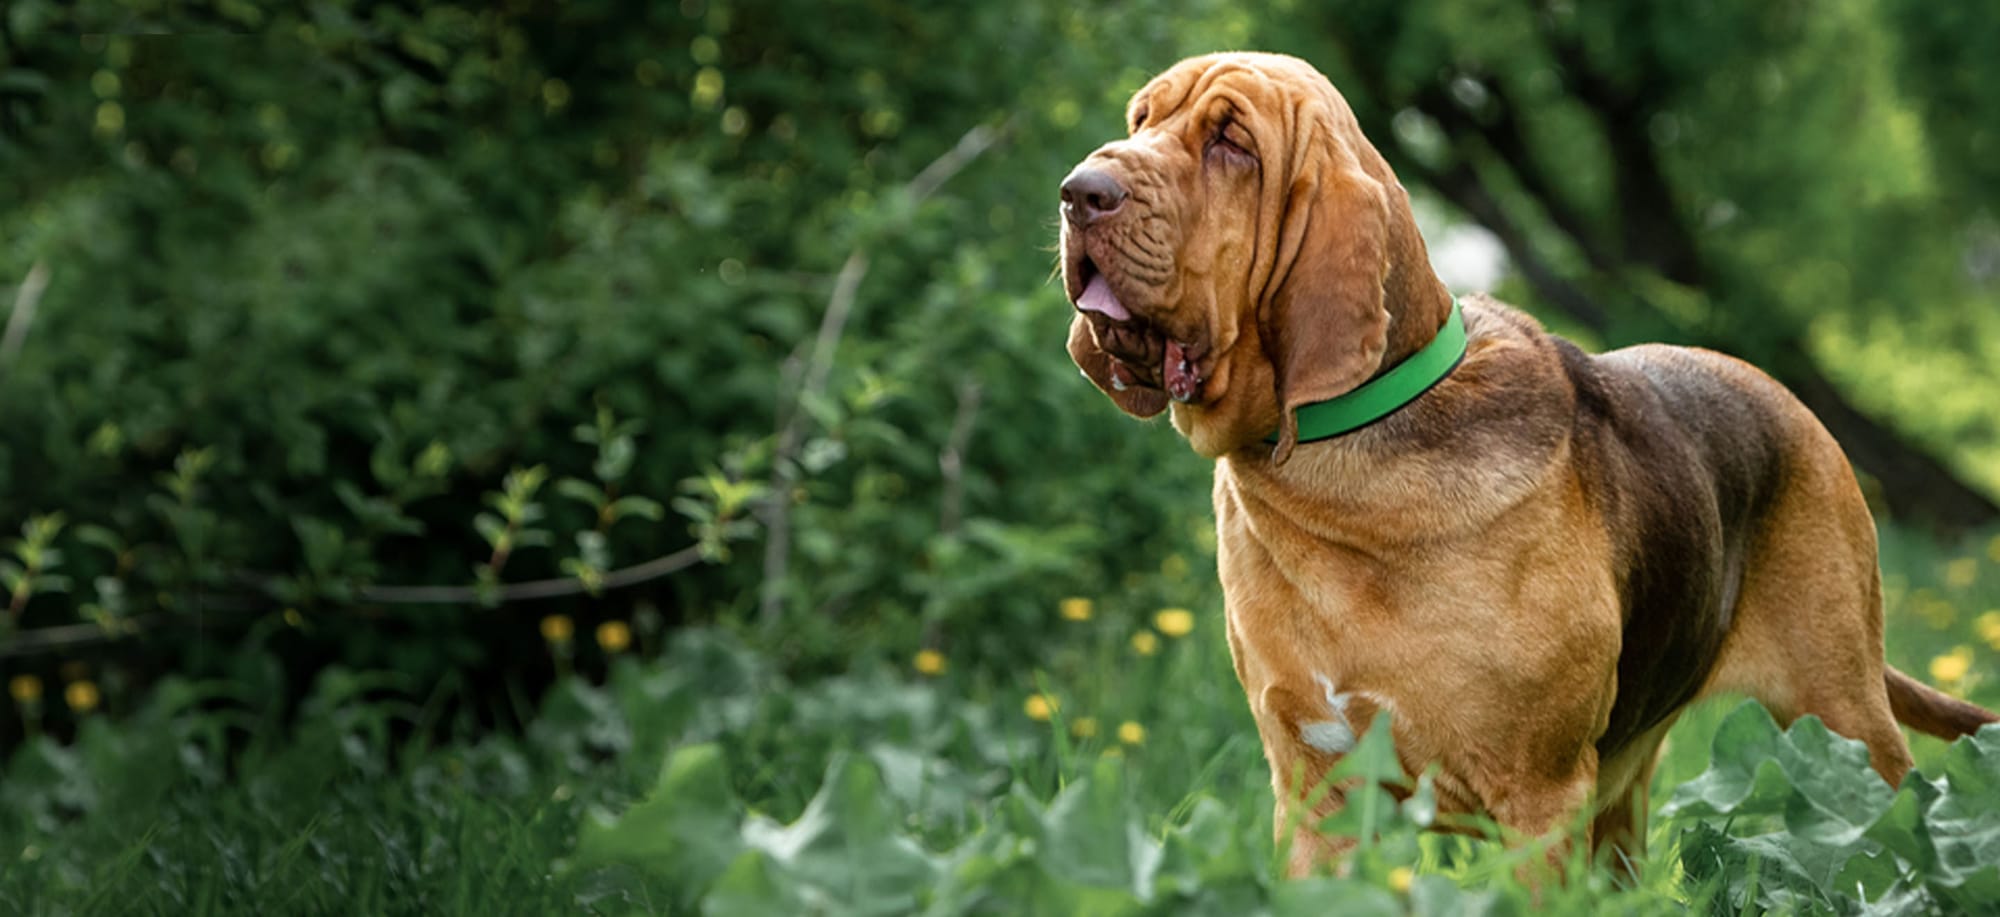 Can Bloodhounds See Through Smoke?